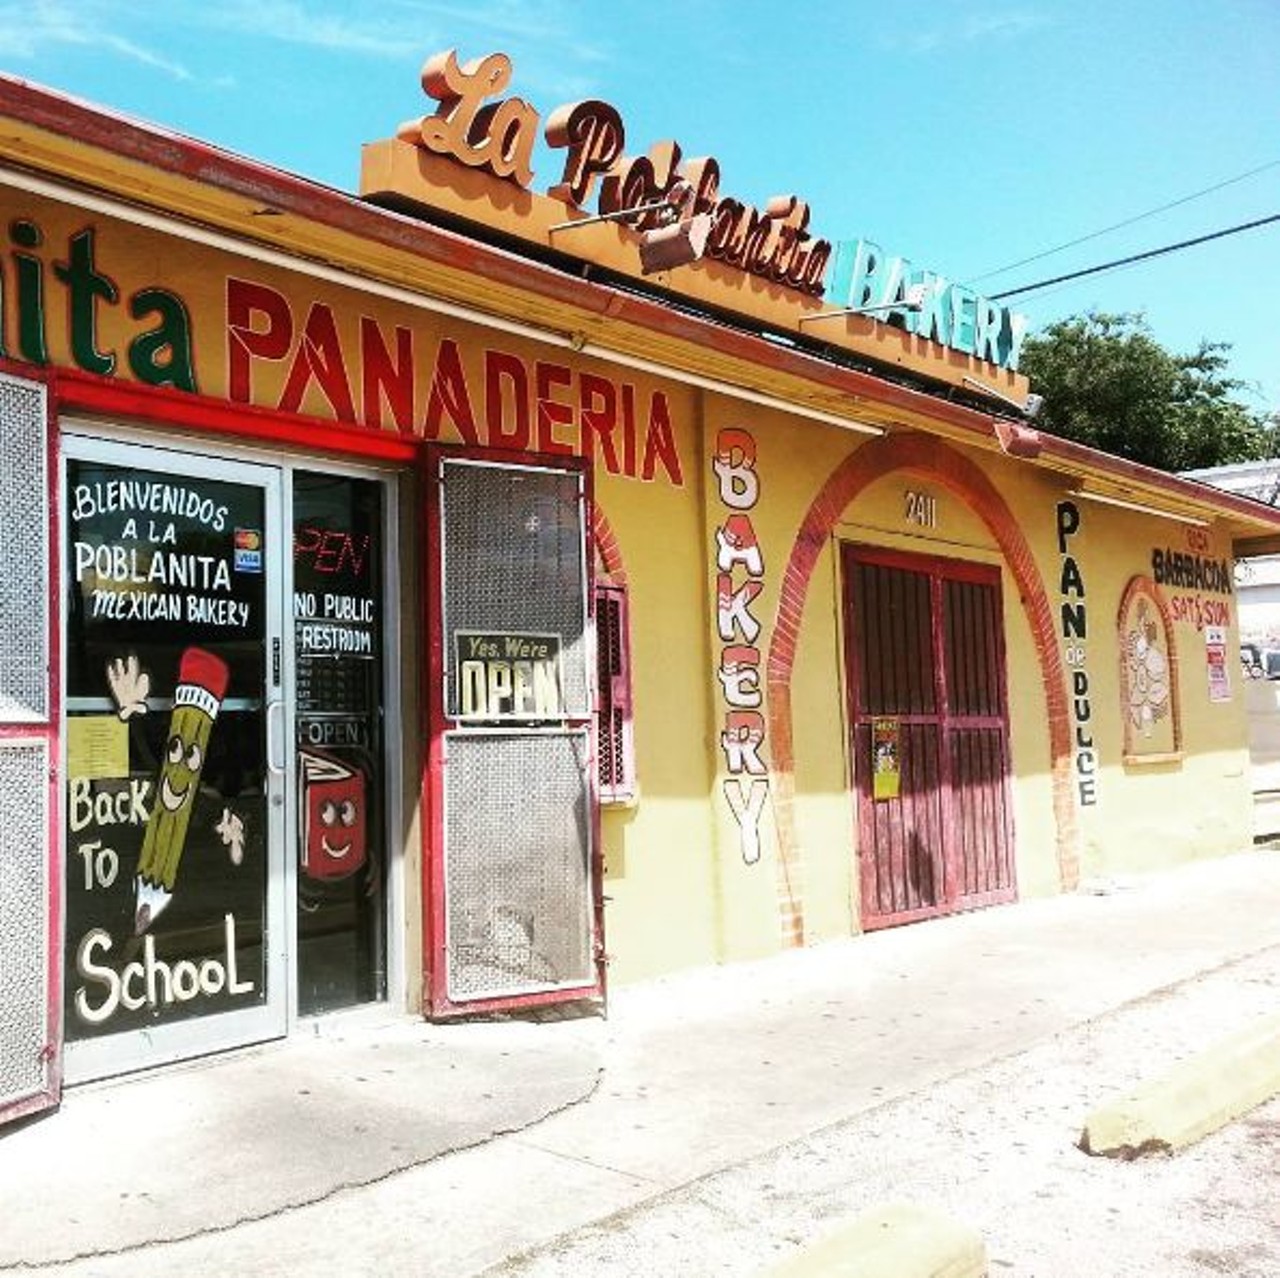 La Poblanita Bakery
2411 N. Zarzamora St., (210) 732-1554
This panaderia has a framed picture of the Virgin Mary, so it&#146;s probably already a hit with abuela. Treat her to a cream empanada just for good measure, though.
Photo via Instagram, keith_diarmit